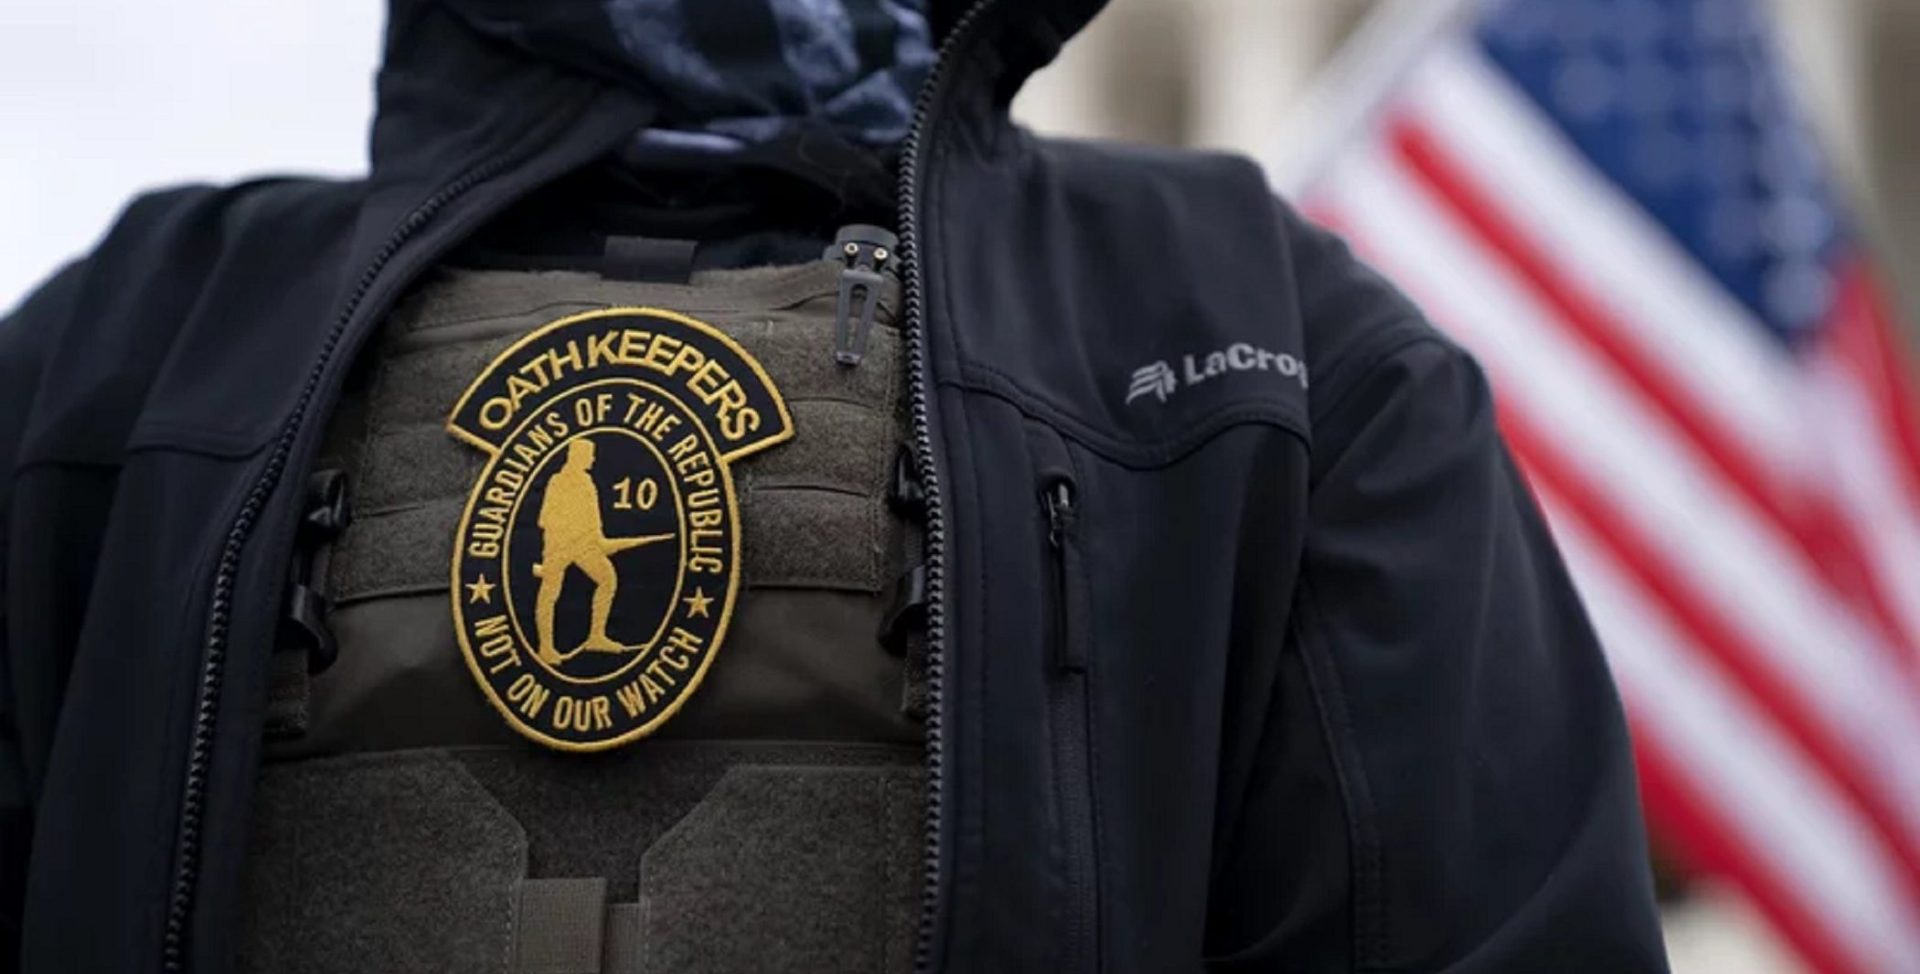 A demonstrator wears a badge for the extremist group the Oath Keepers on a protective vest during a protest outside the Supreme Court in Washington, D.C., on Jan. 5, 2021.